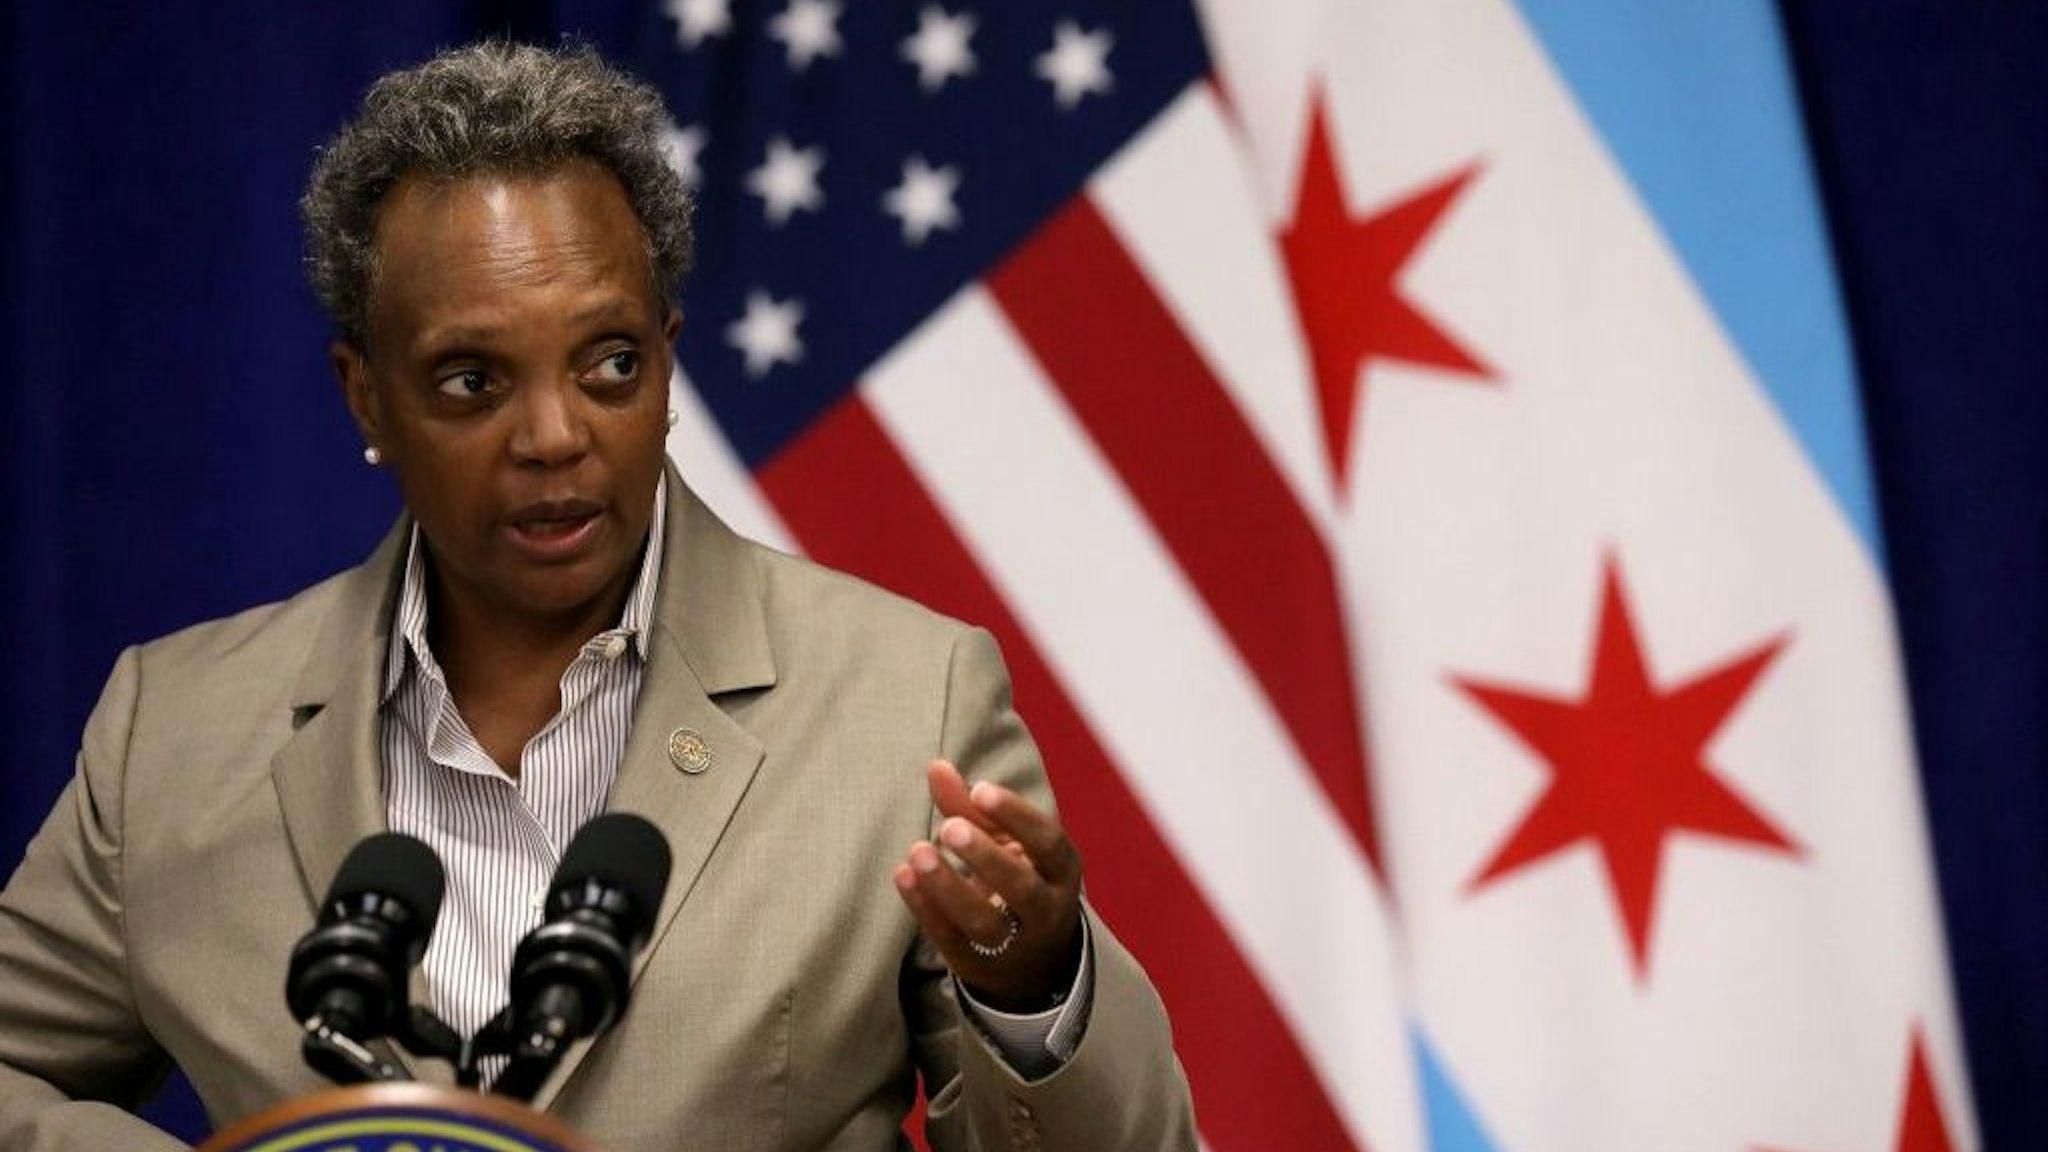 Mayor Lori Lightfoot speaks during a news conference at the Greater Western Community Development Project in Chicago on Monday, Sept. 14, 2020. (Antonio Perez/Chicago Tribune/TNS)